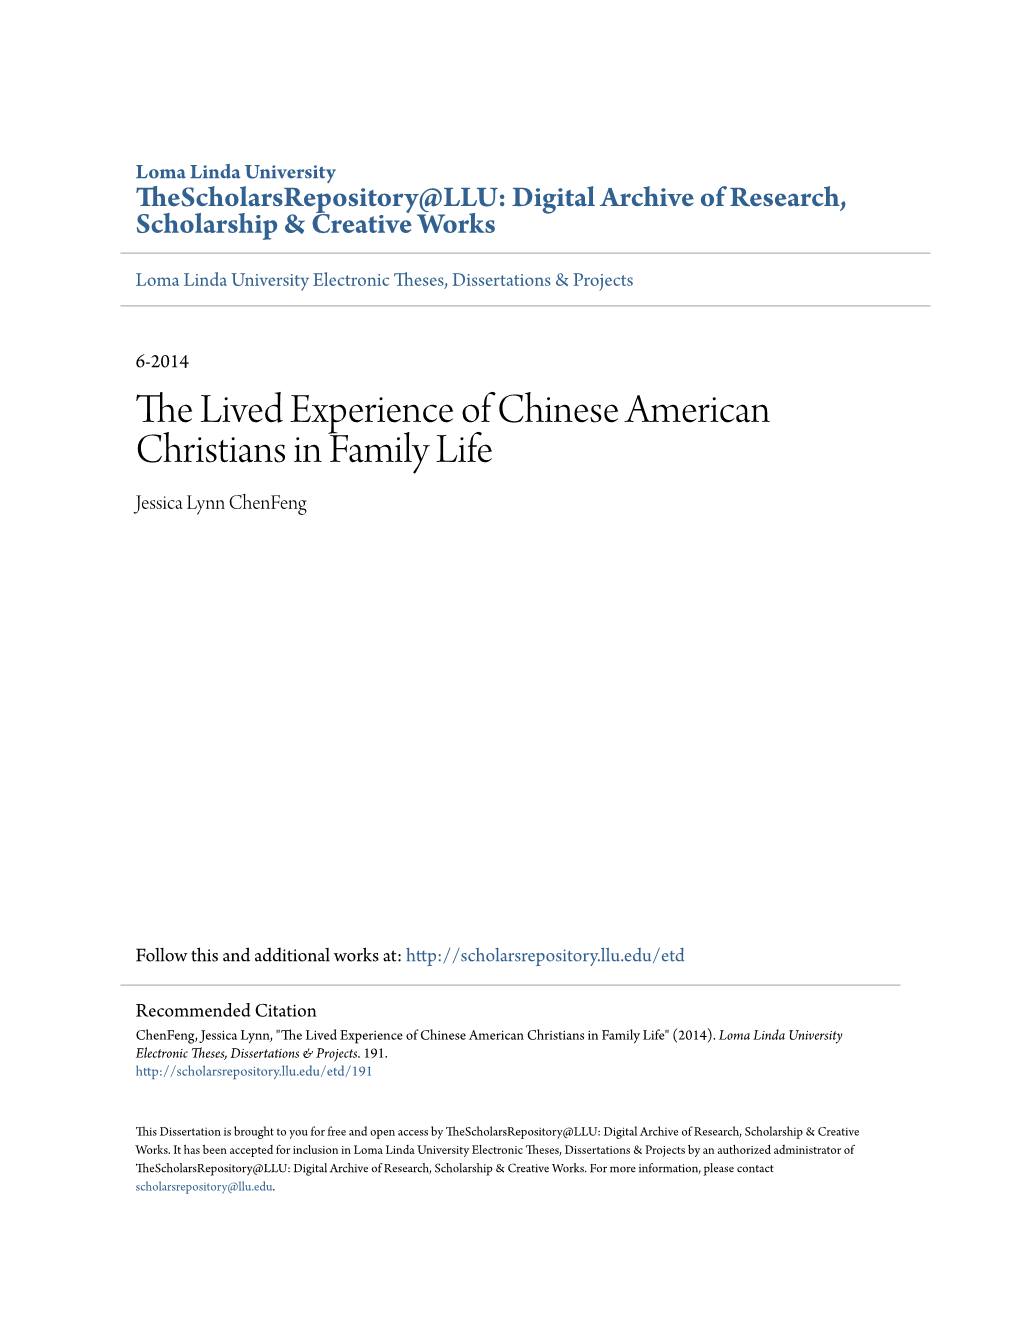 The Lived Experience of Chinese American Christians in Family Life Jessica Lynn Chenfeng